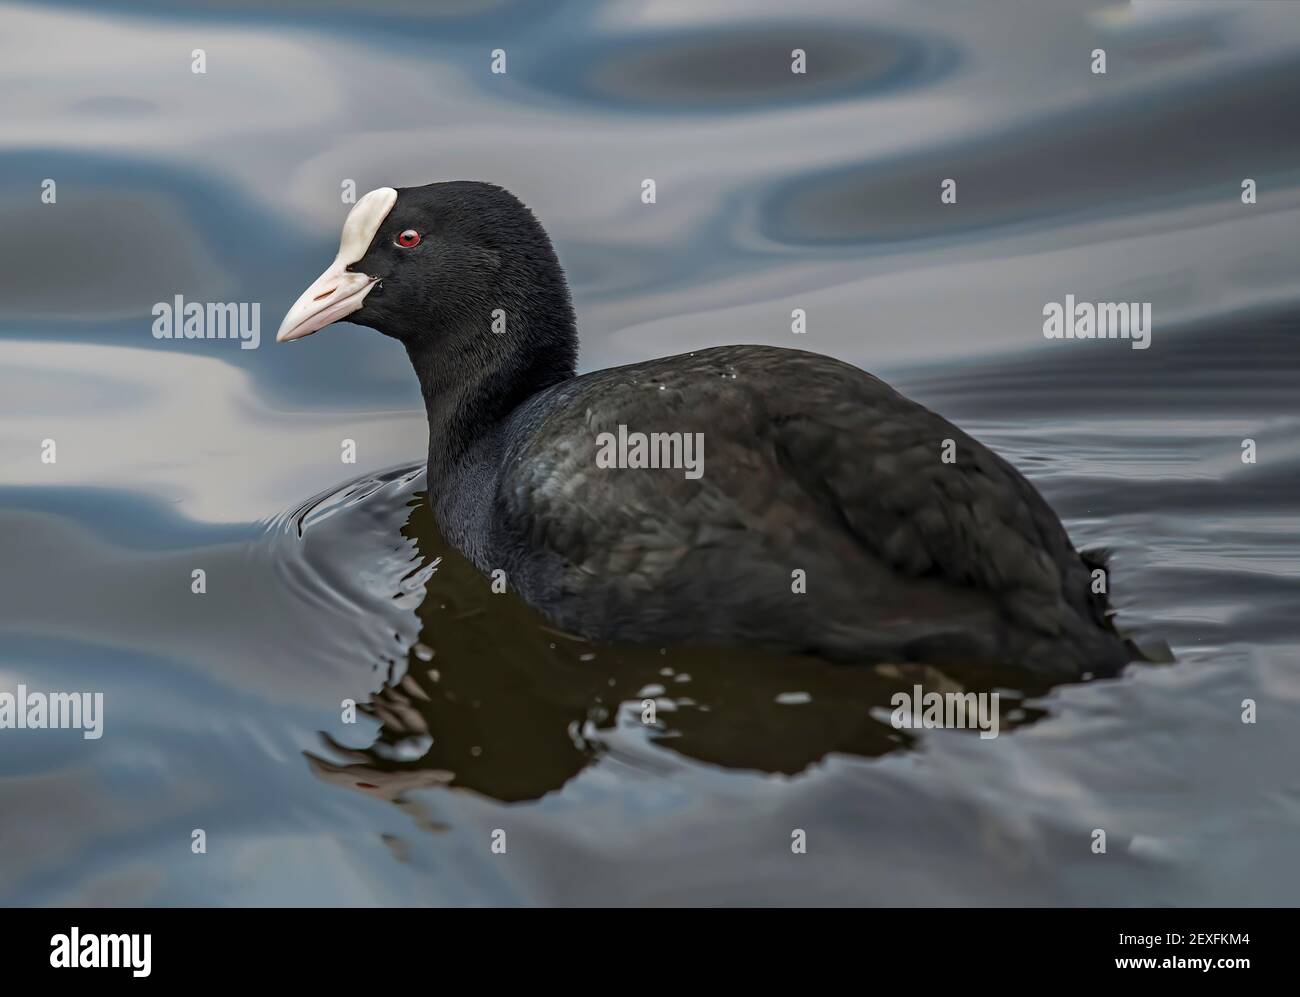 A Coot on a loch, close up, in Scotland, in the winter time Stock Photo